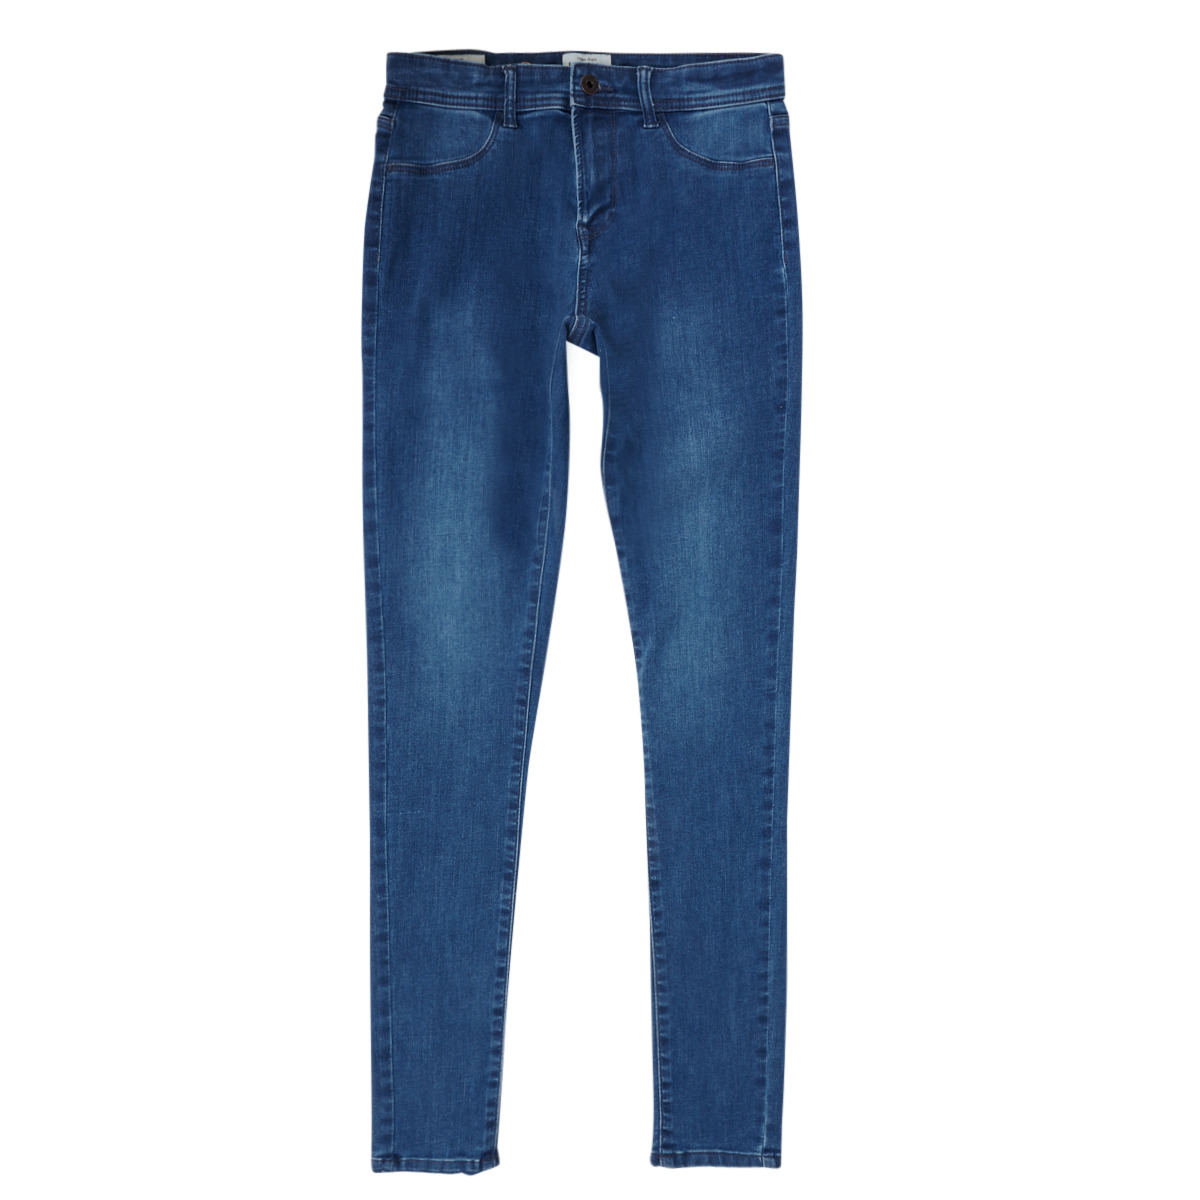 Pepe jeans  Skinny jeans Pepe jeans MADISON JEGGING